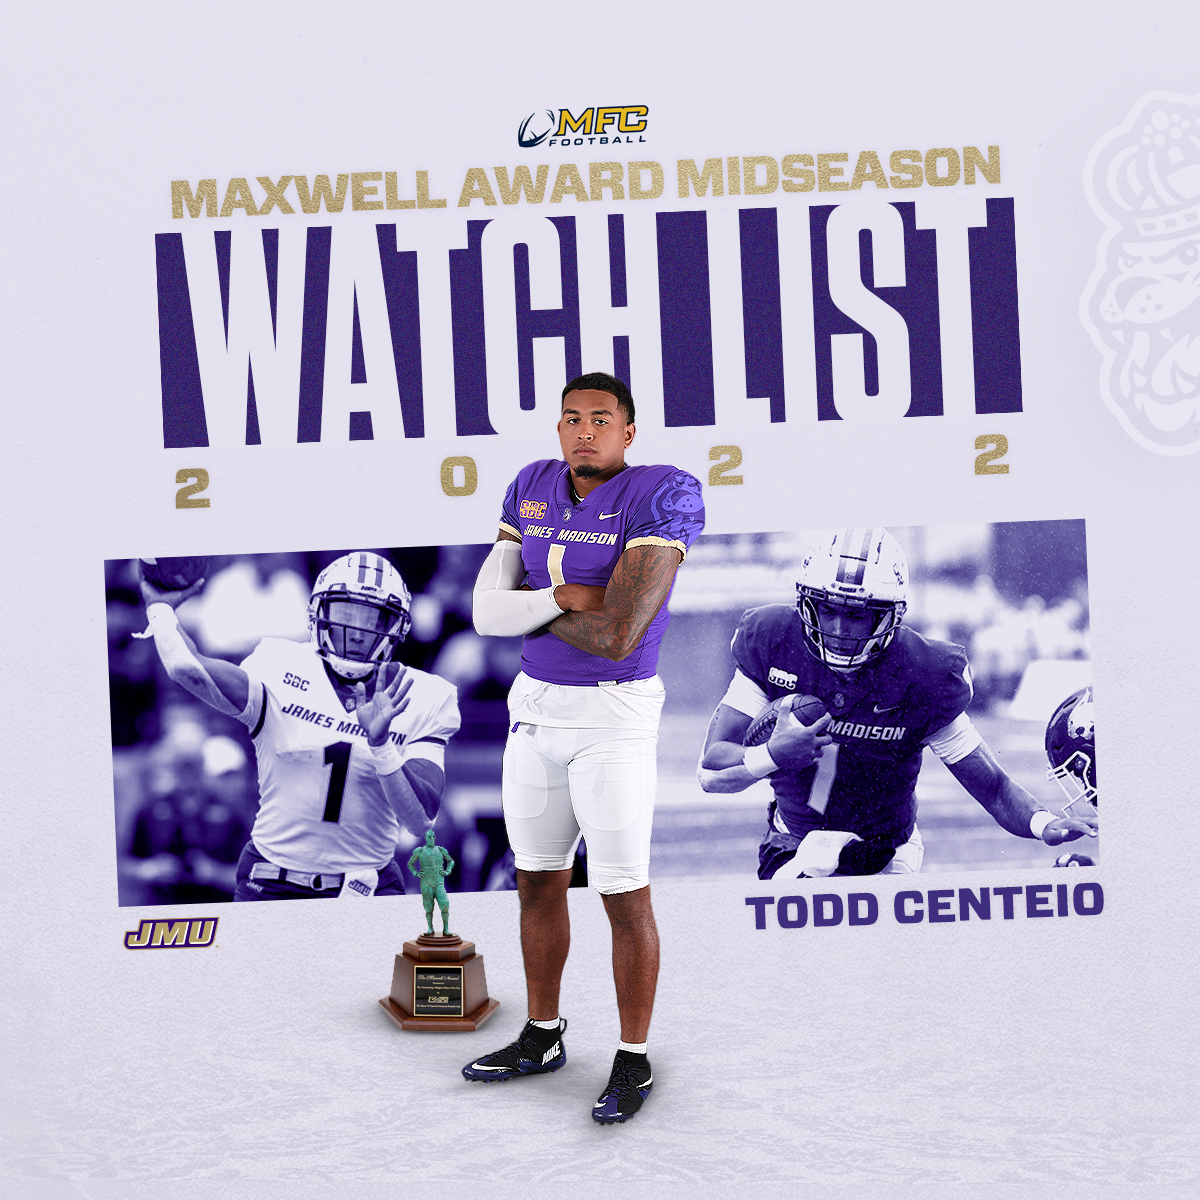 𝐌𝐀𝐗𝐖𝐄𝐋𝐋 𝐀𝐖𝐀𝐑𝐃 👀 @toddycenteio has been selected to the midseason watch list for the prestigious Maxwell Award! 📰 bit.ly/3emGlL5 #GoDukes | #SunBeltFB